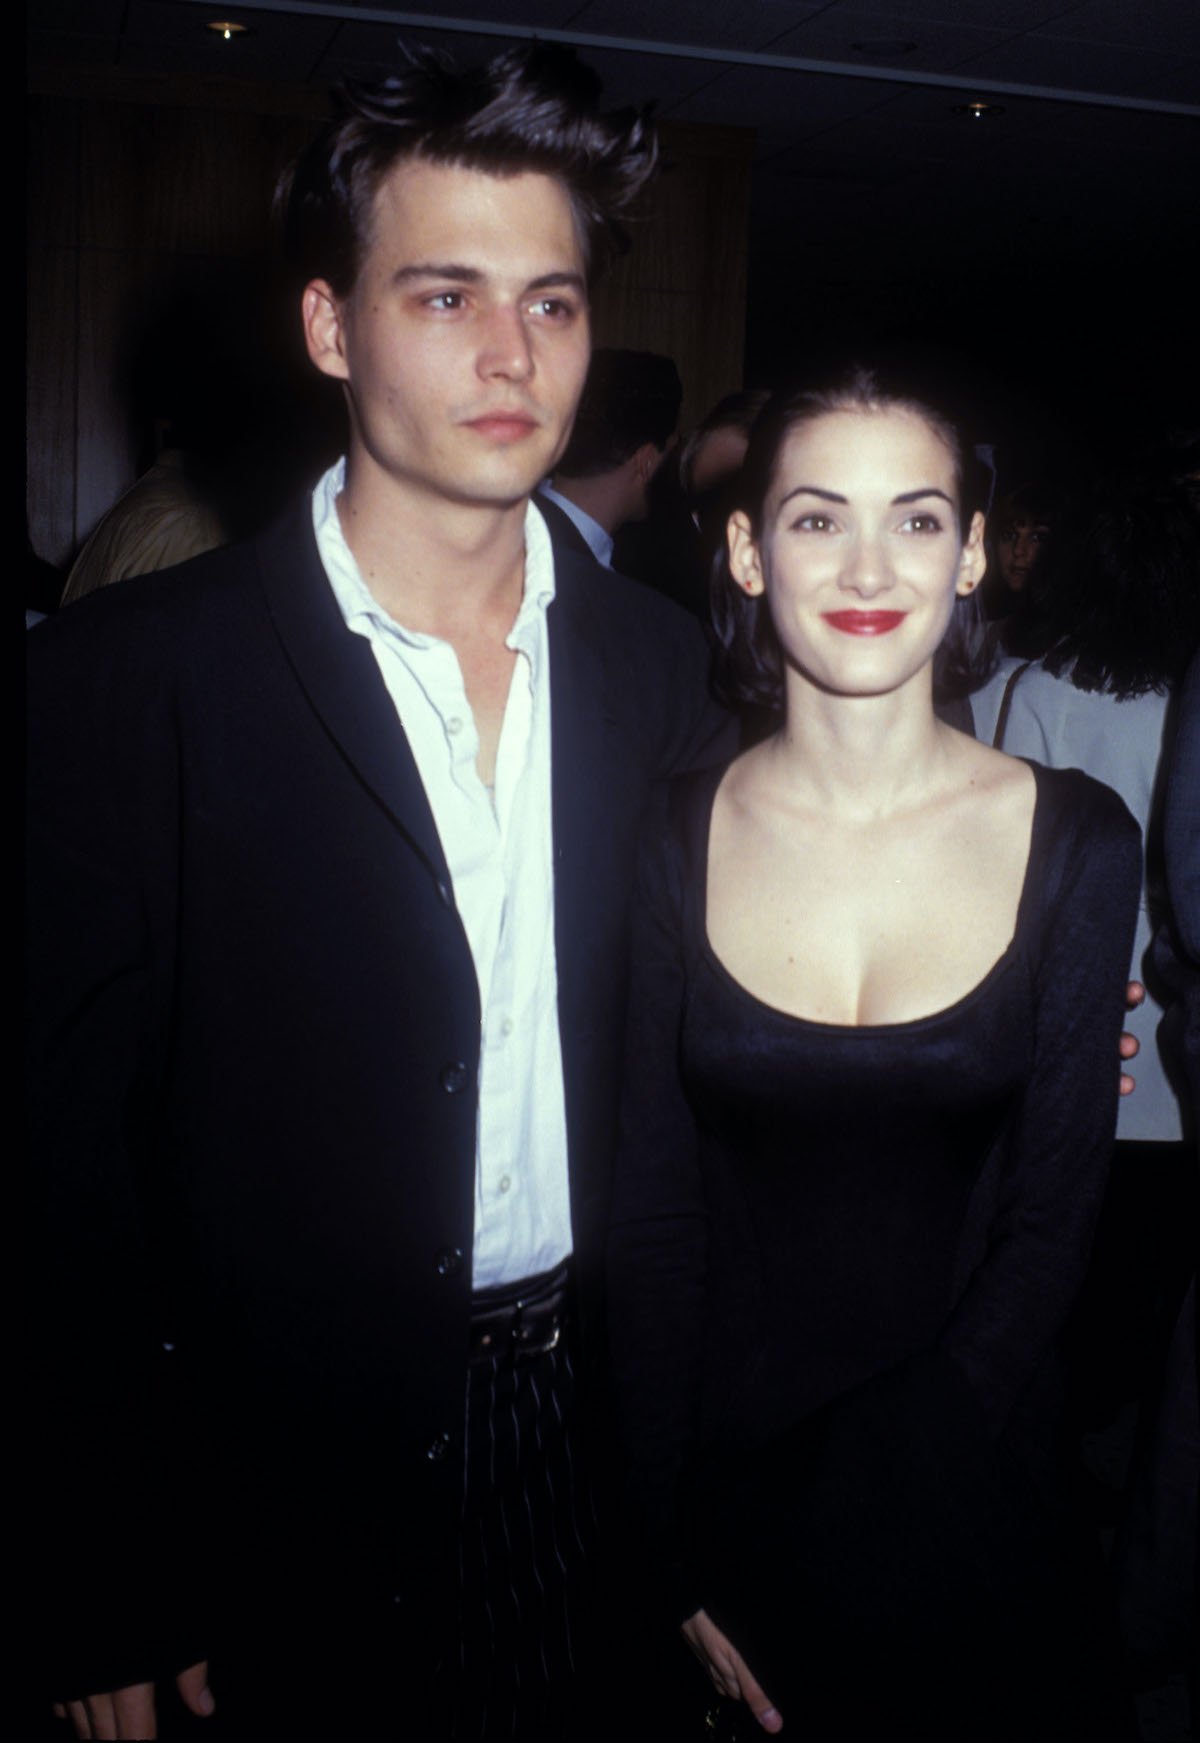 'Winona Forever': Johnny Depp and Winona Ryder's Most Romantic Moments